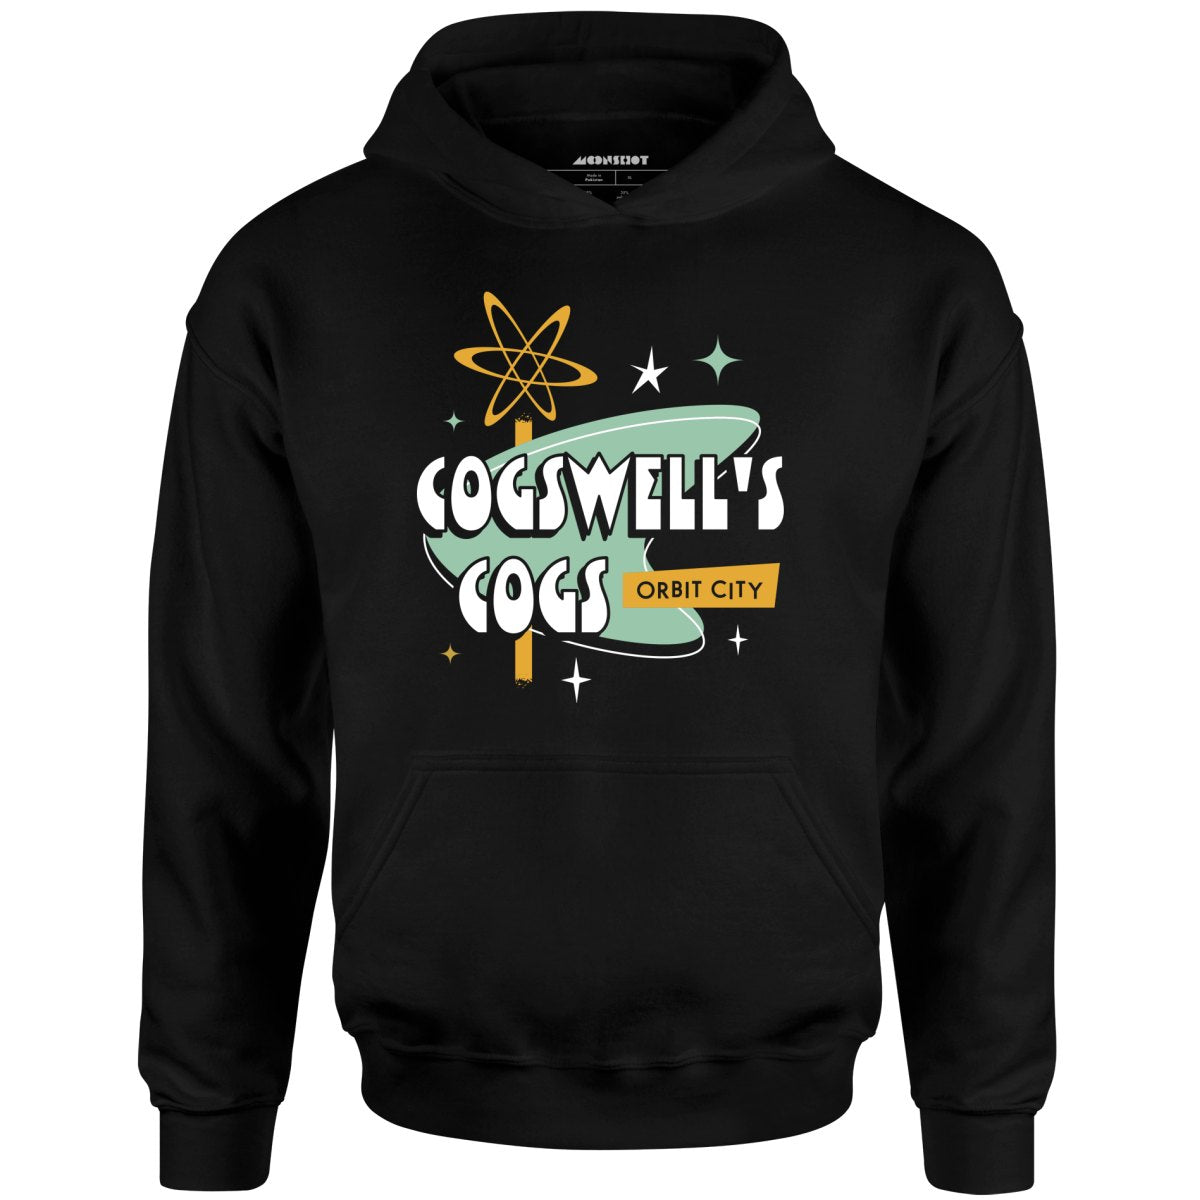 Cogswell's Cogs - Unisex Hoodie